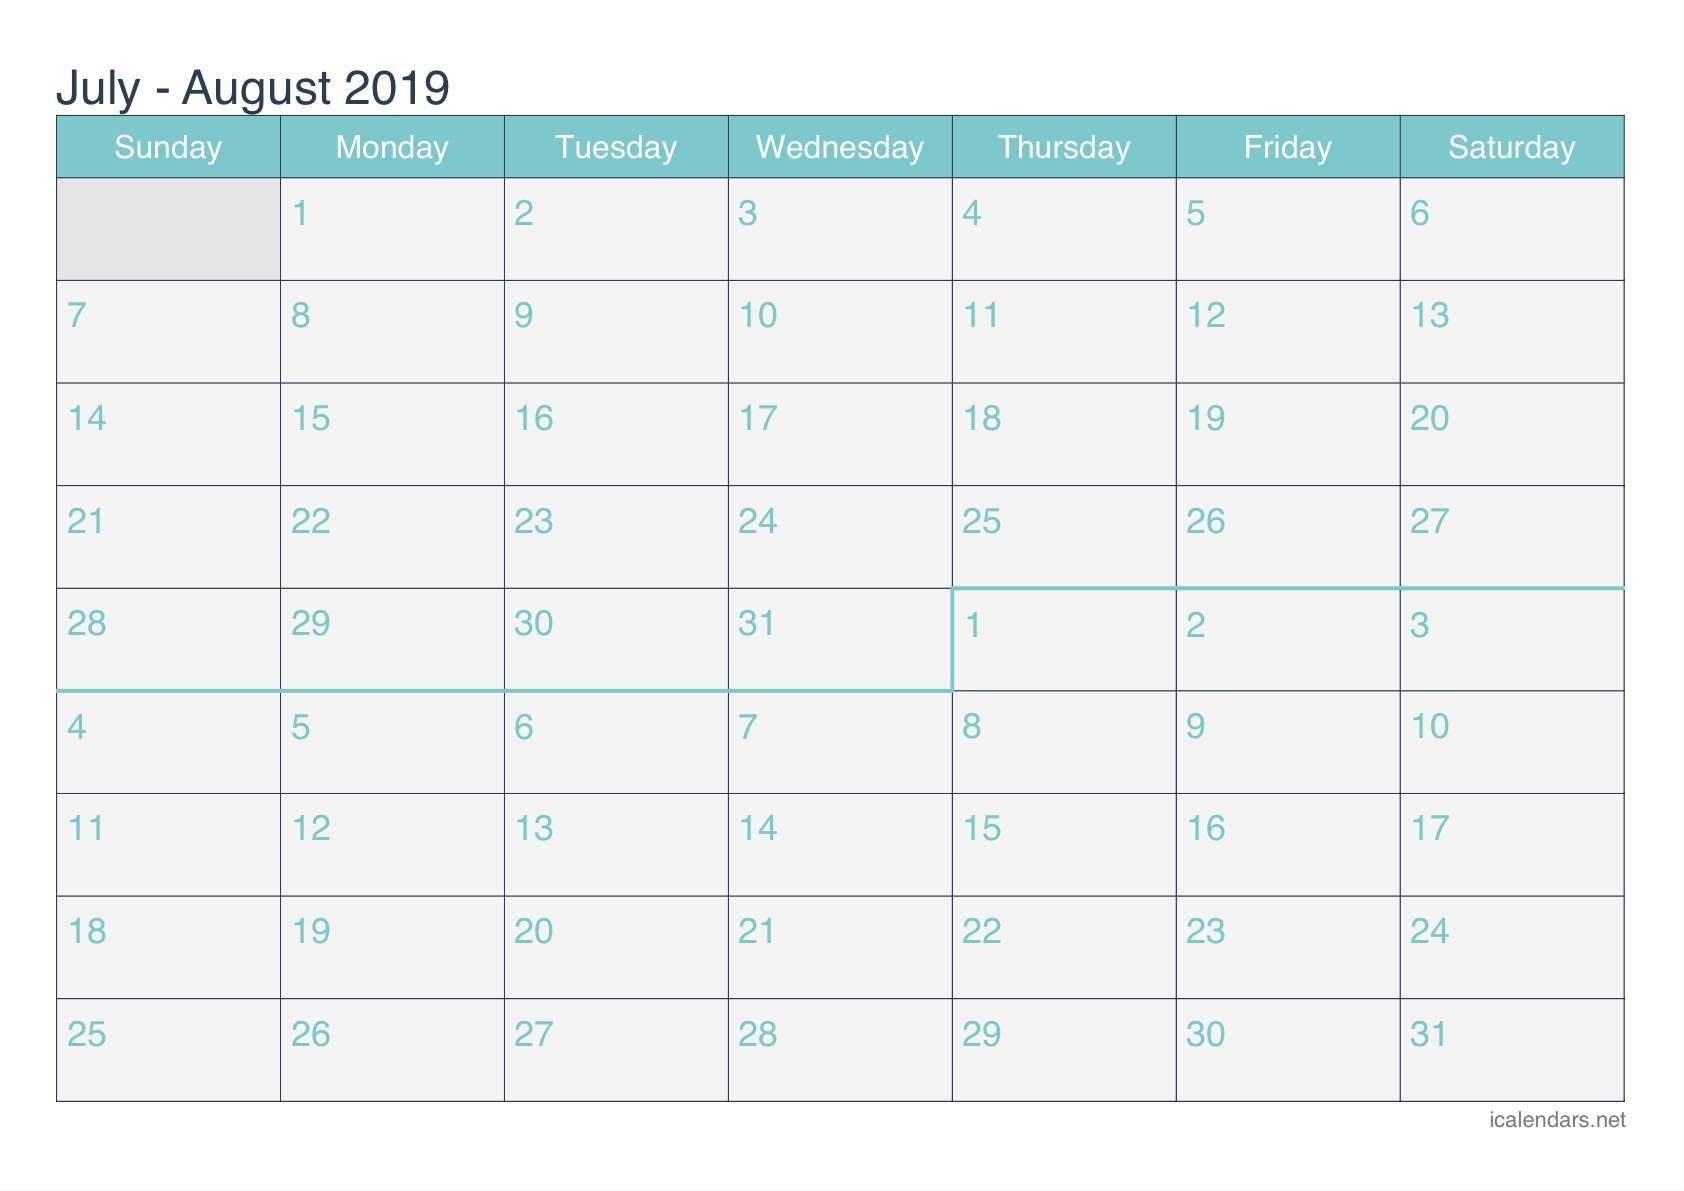 July And August 2019 Printable Calendar - Icalendars-Blank Timetable For The Month Of July And August